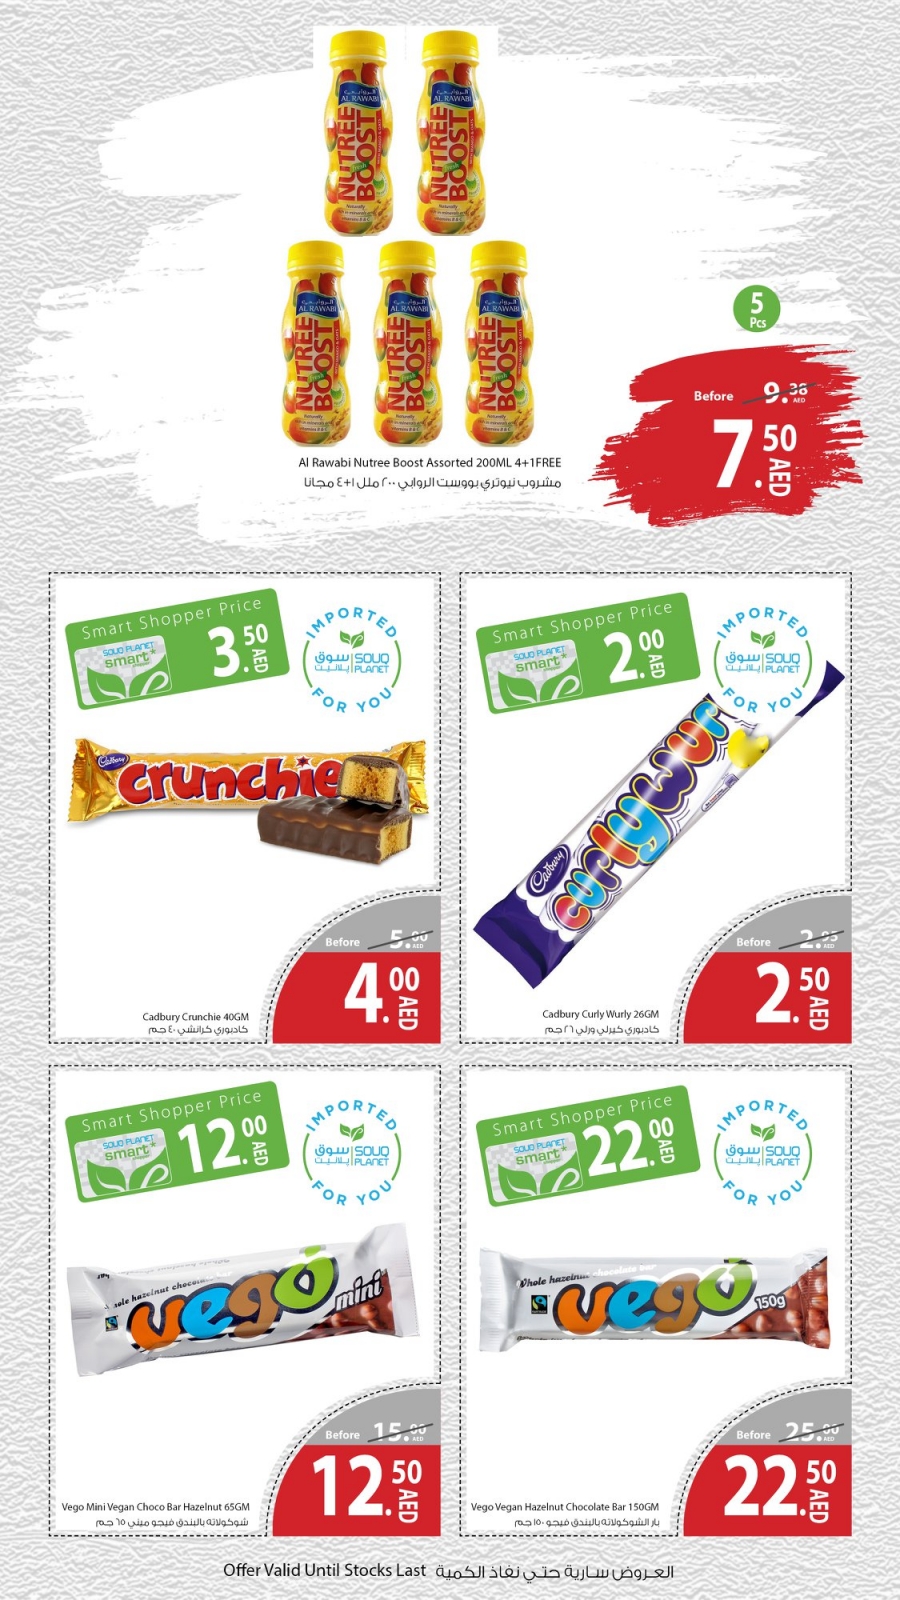 Souq Planet March Extra Offers